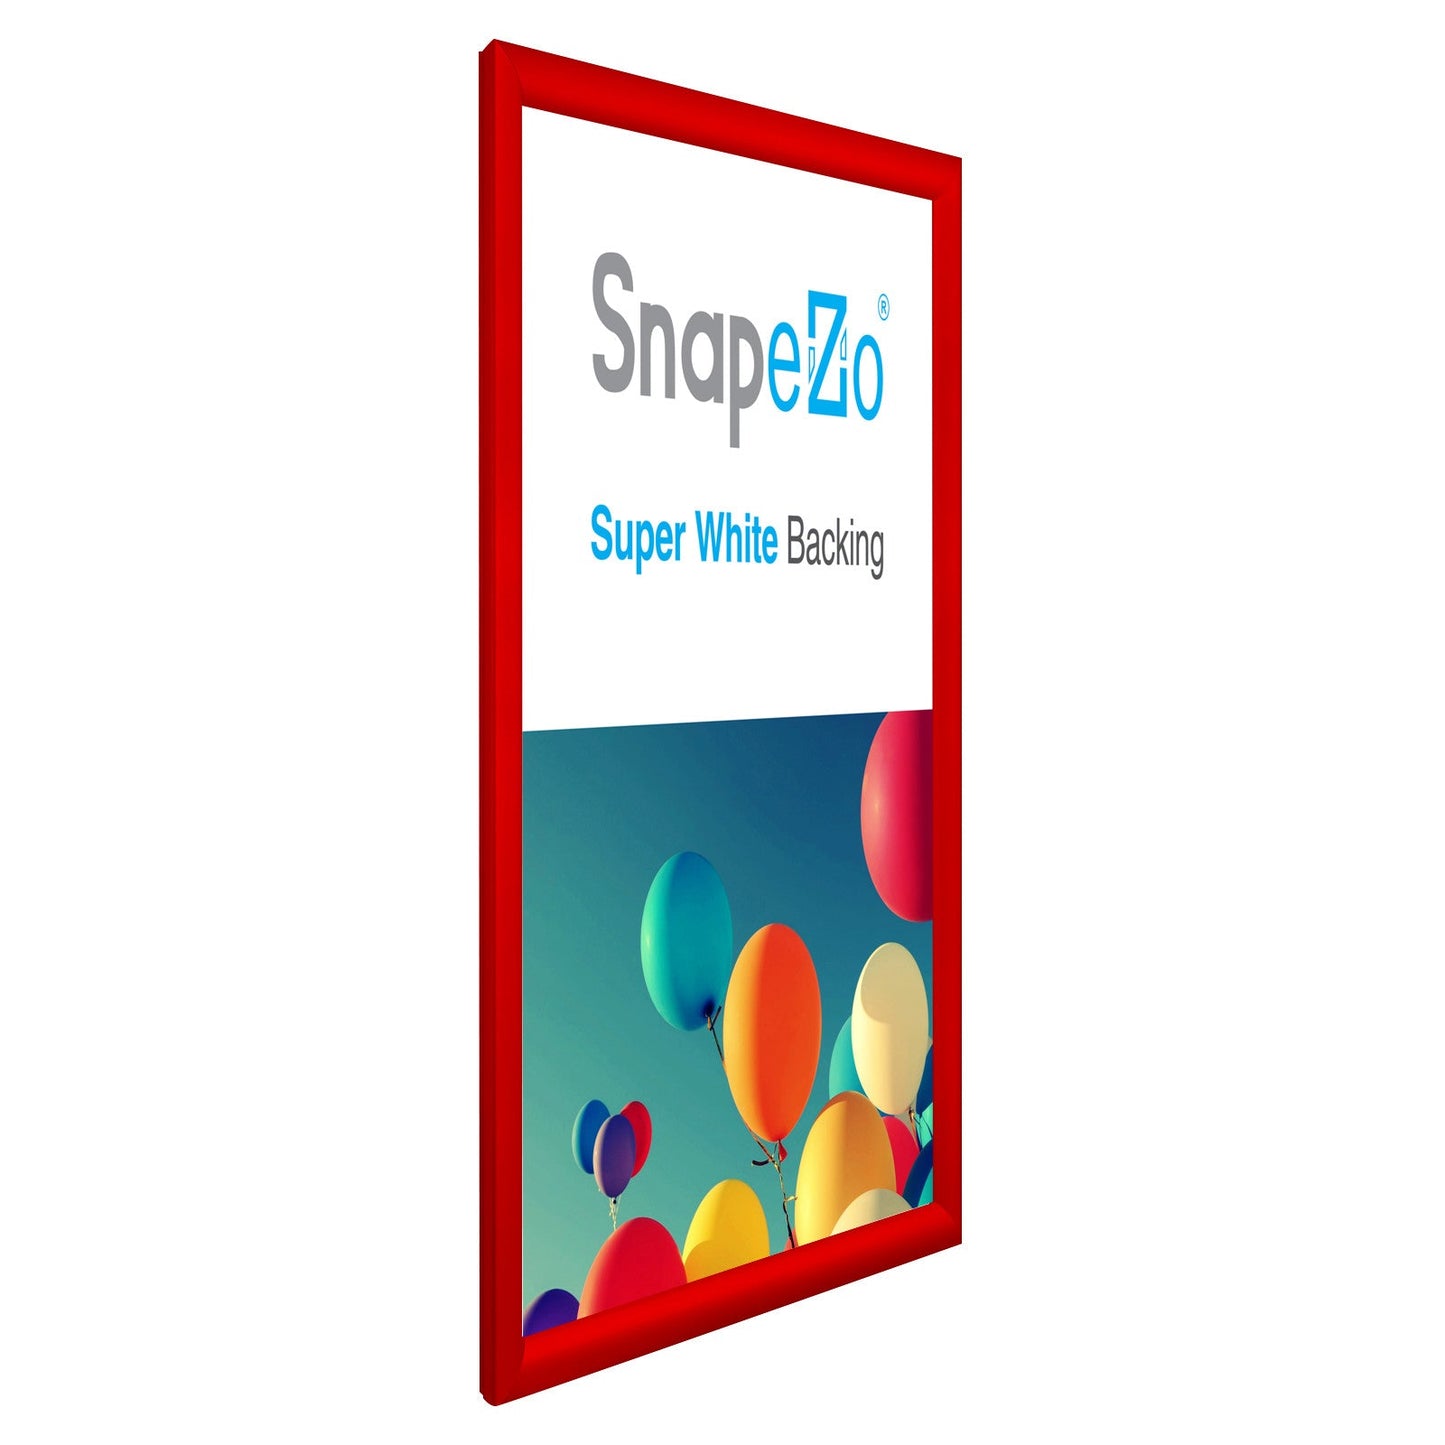 21x28 Red SnapeZo® Snap Frame - 1.2" Profile